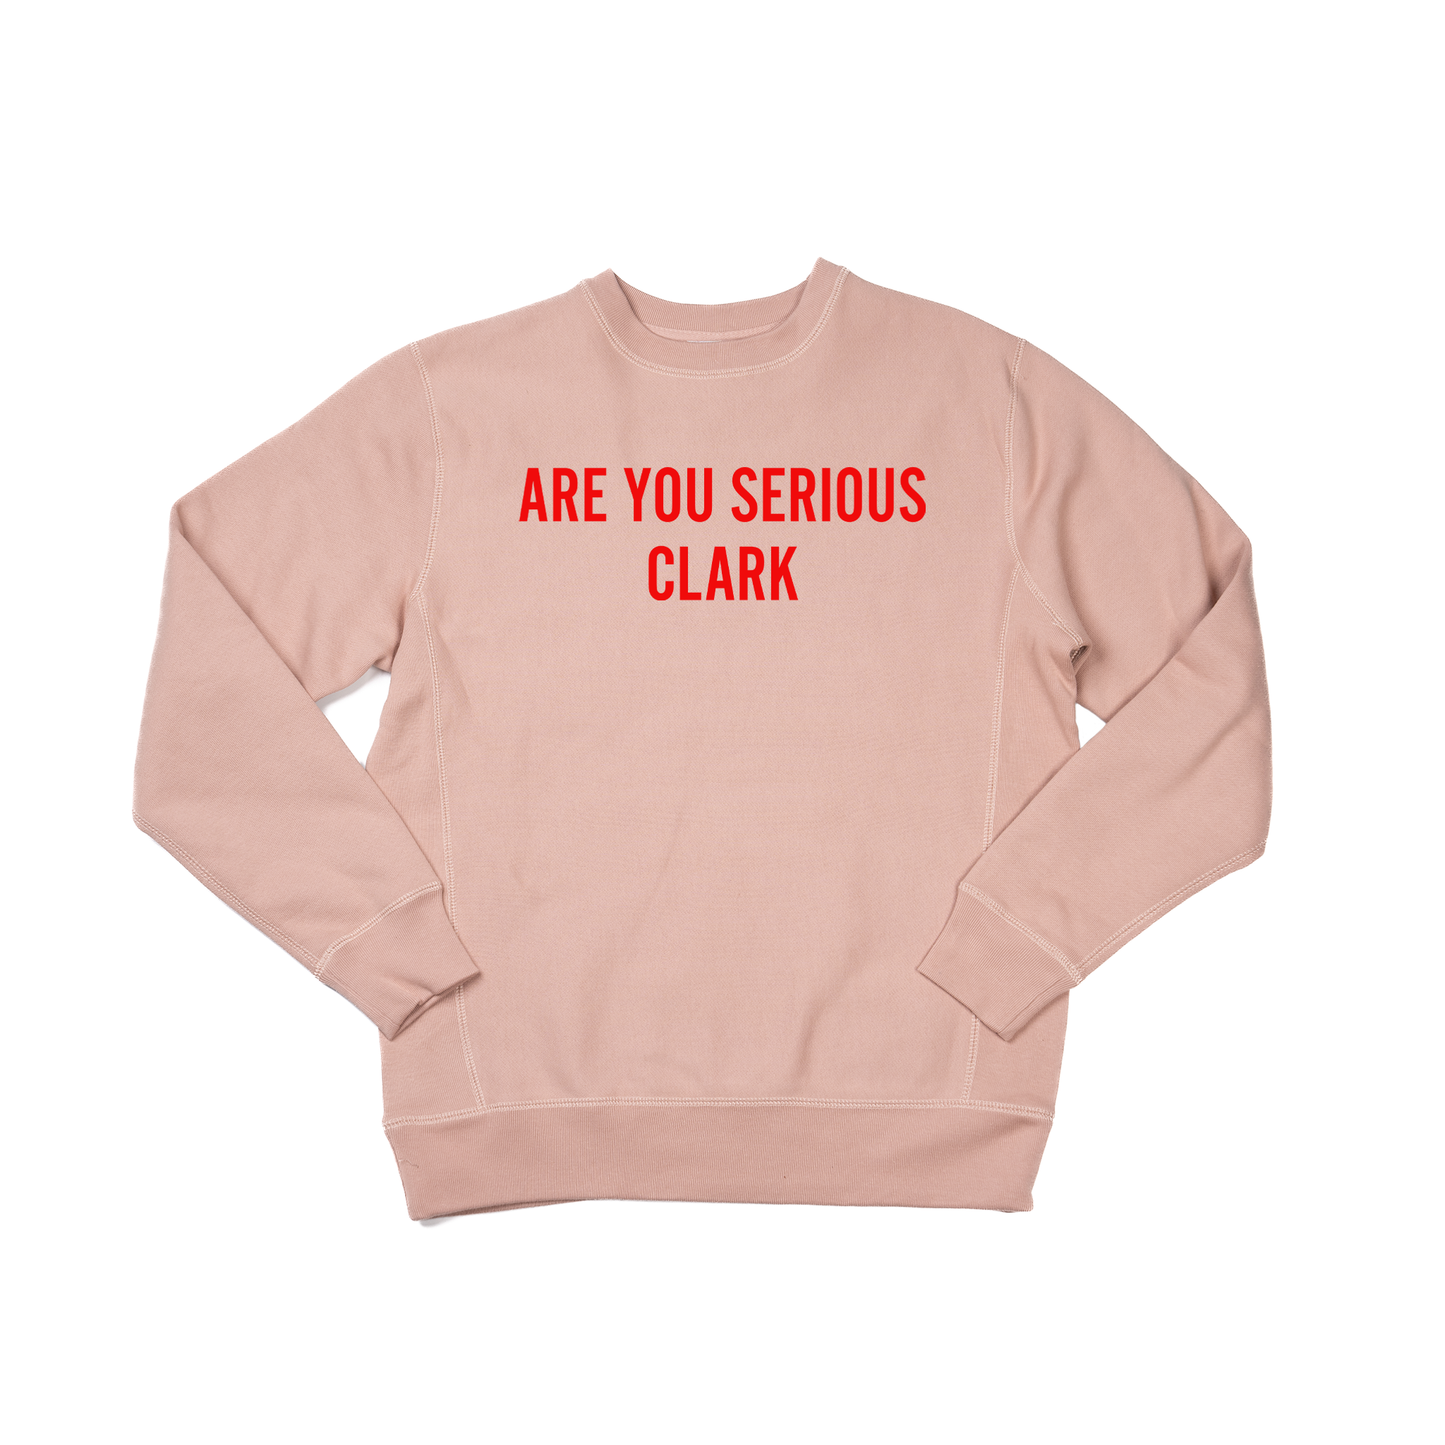 Are You Serious Clark (Red) - Heavyweight Sweatshirt (Dusty Rose)